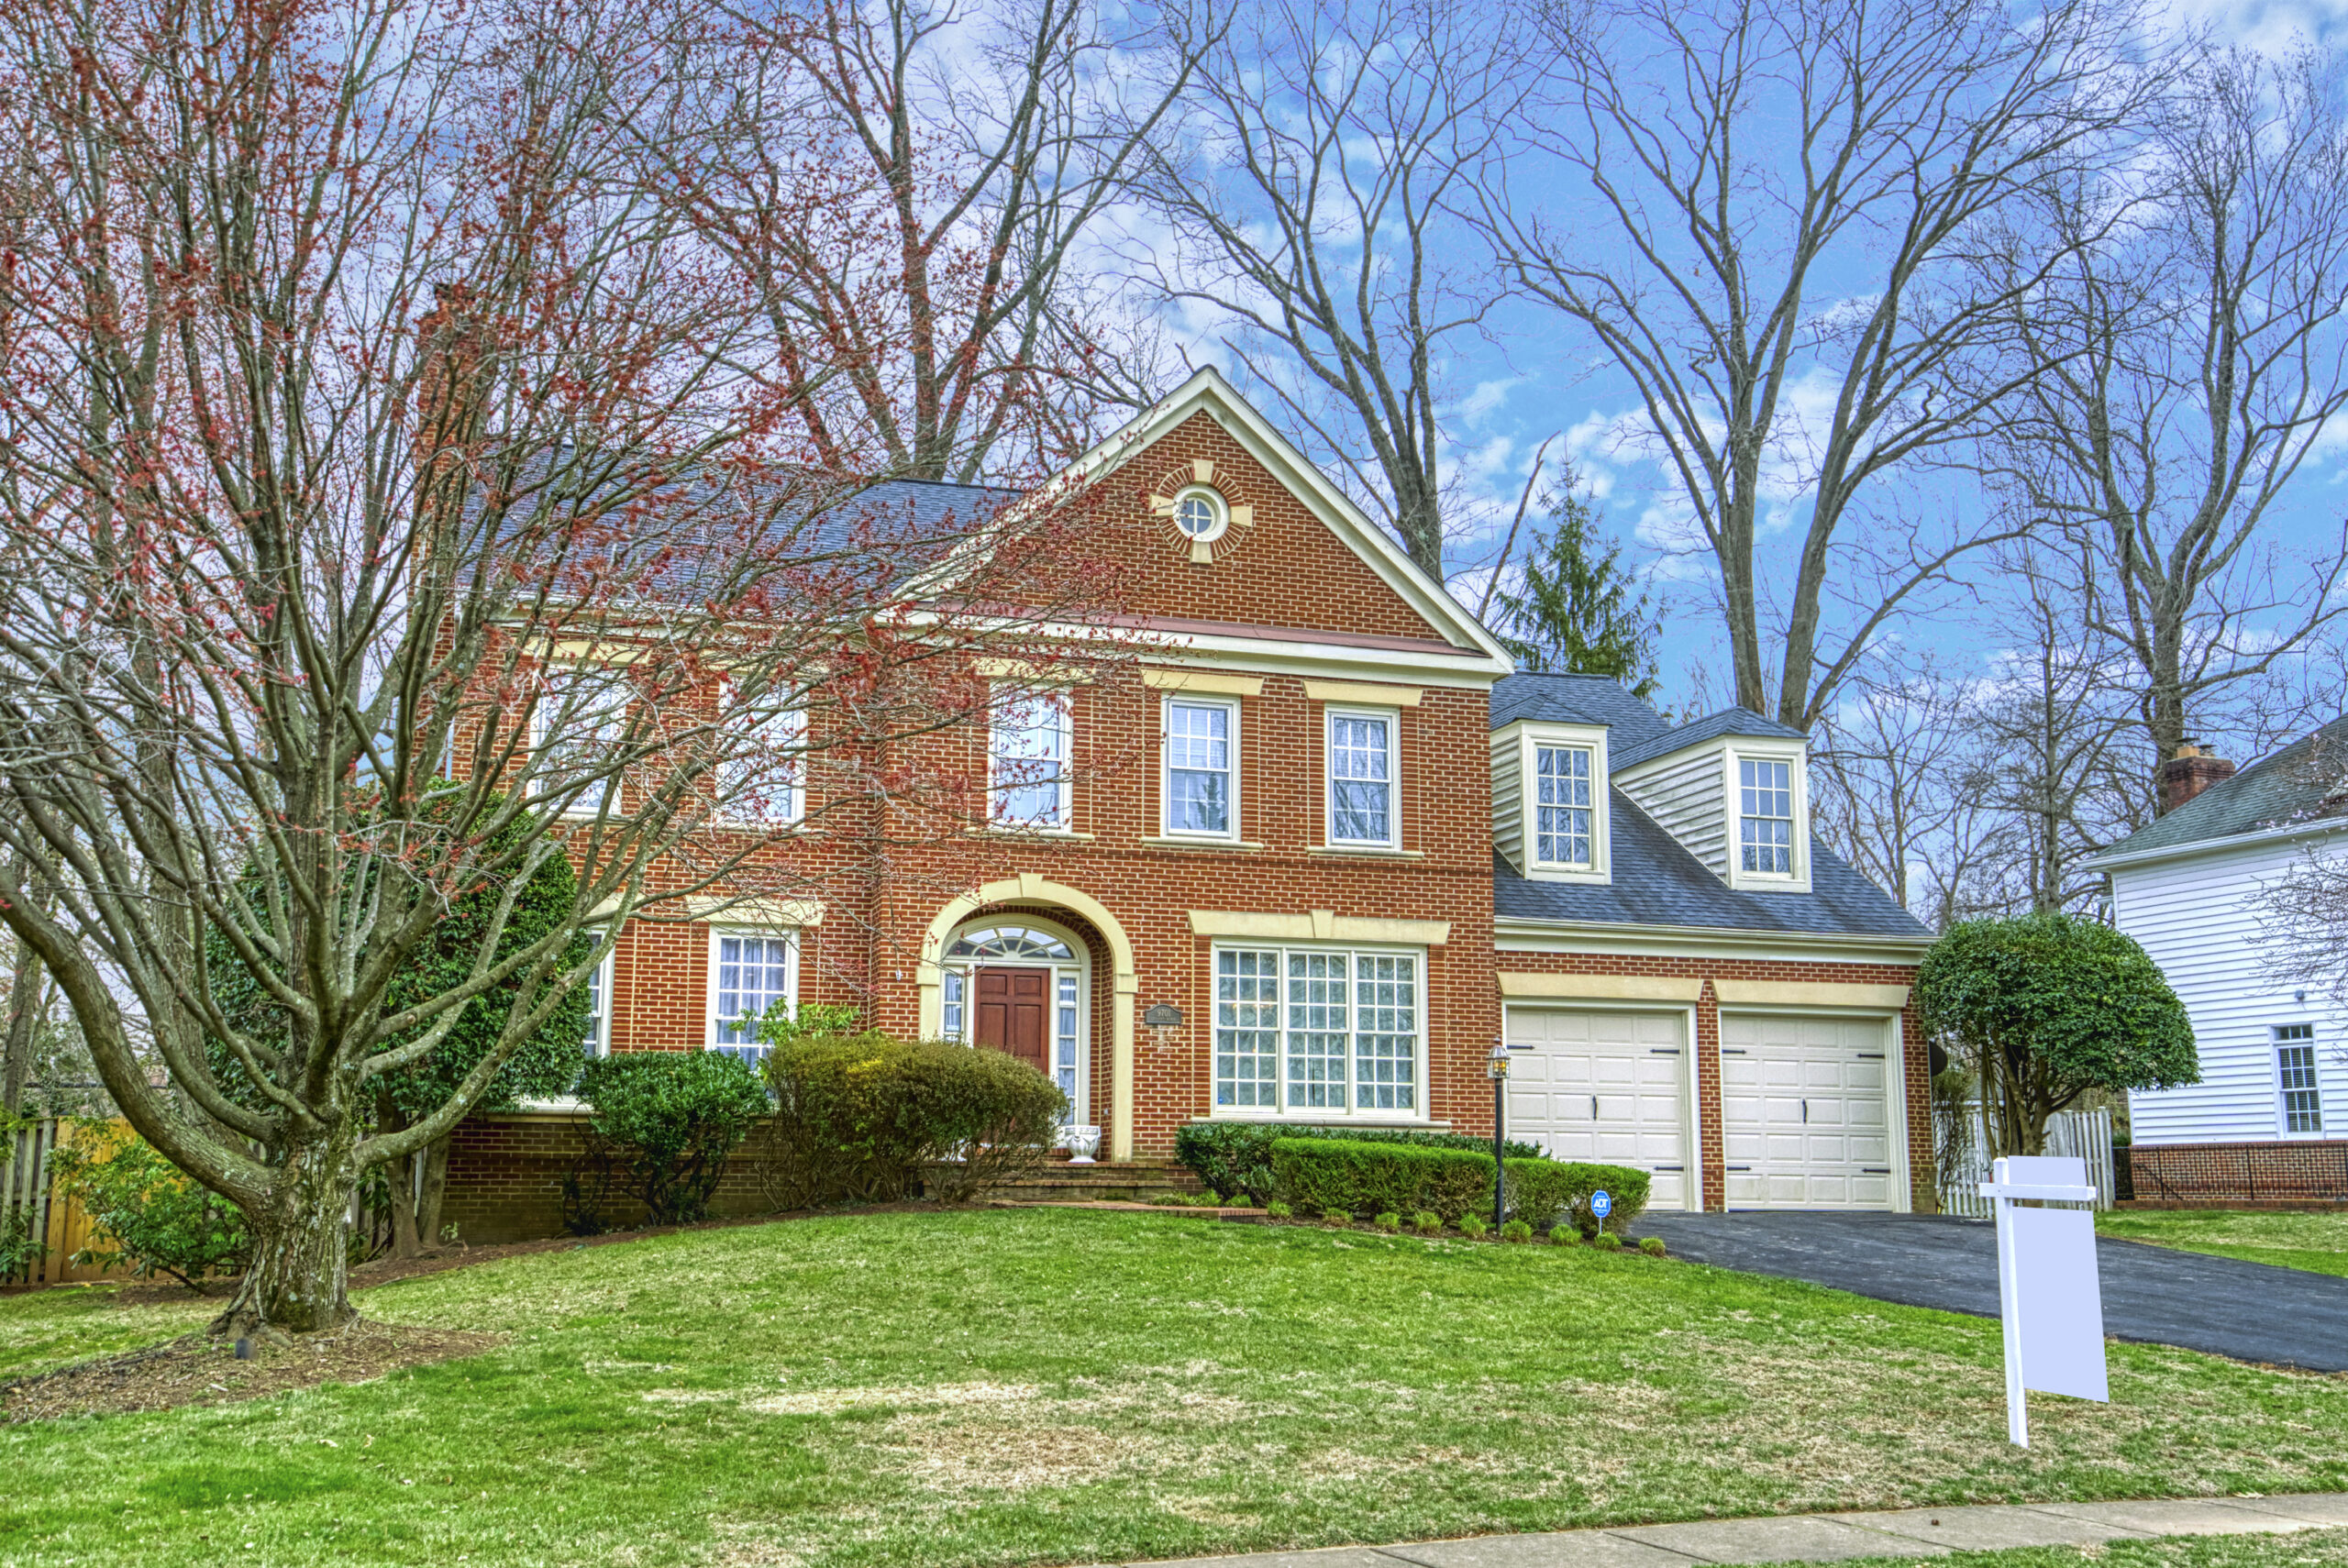 Professional exterior photo of 9701 Chilcott Manor Way - taken from the front left angle, all brick colonial with 2 car garage